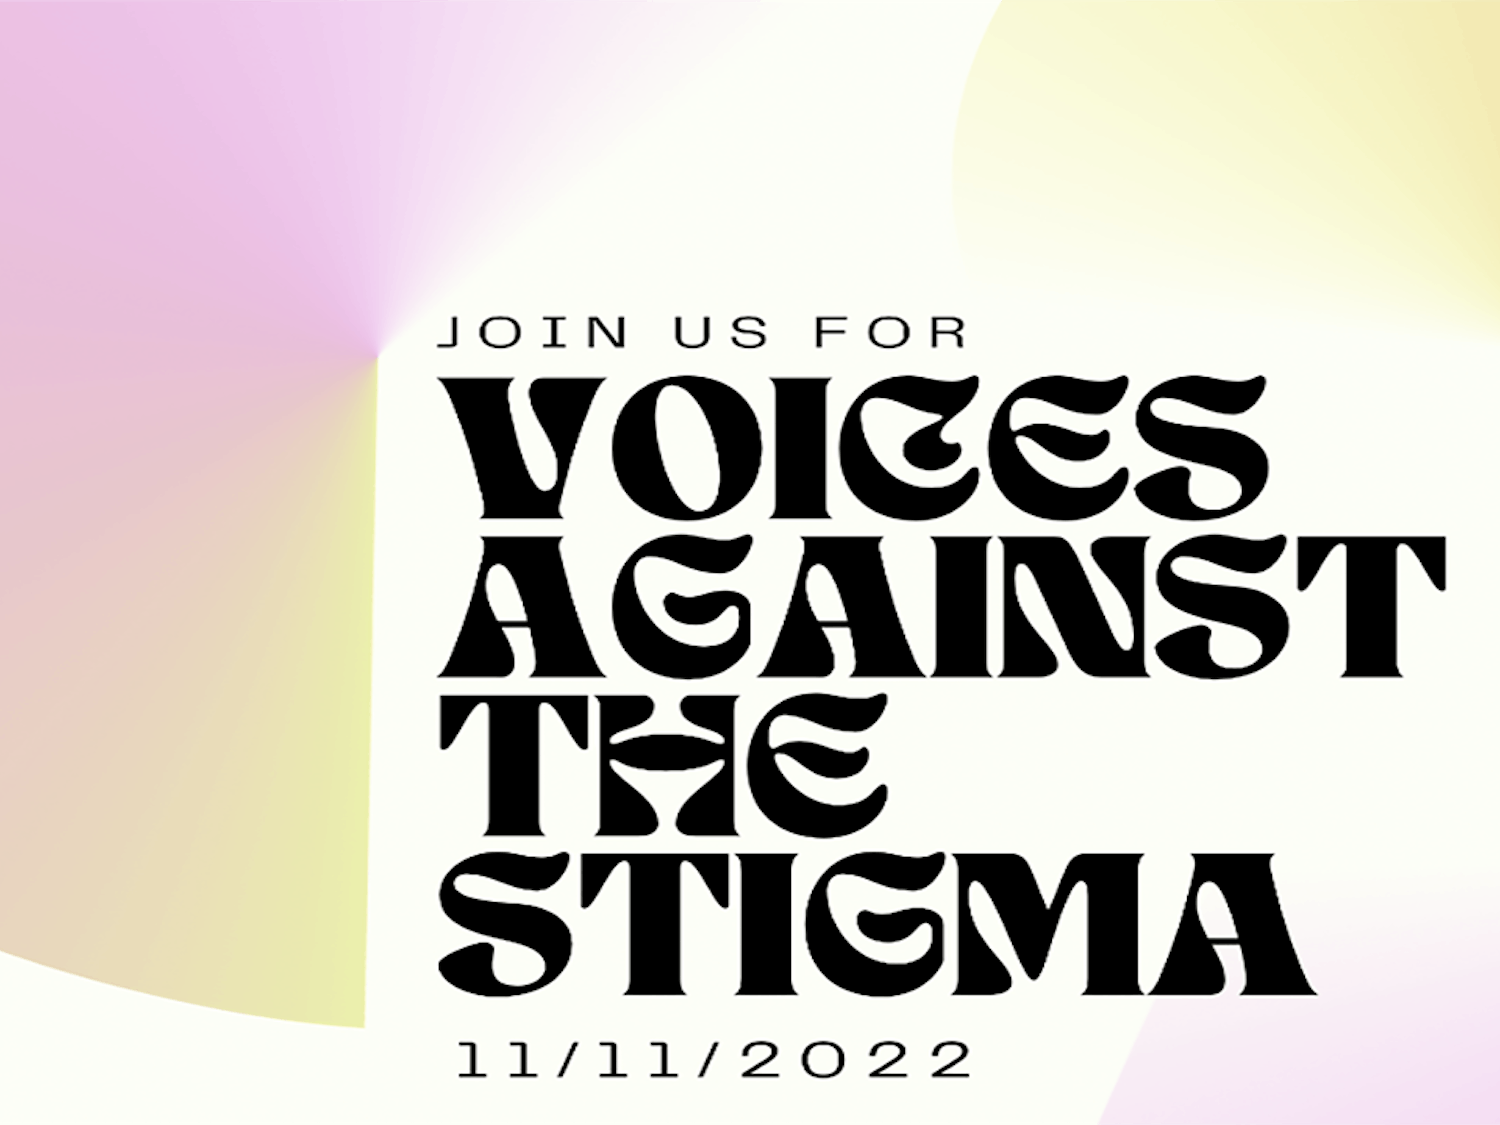 Graphic for Voices Against Stigma, local artists and performers will gather to perform to attendees in the Russell House Ballroom in support of mental health activism on Nov. 11, 2022. This mental health awareness concert is free for students and community members and aims to support local mental health organizations and erase the negative stigma surrounding mental health issues.